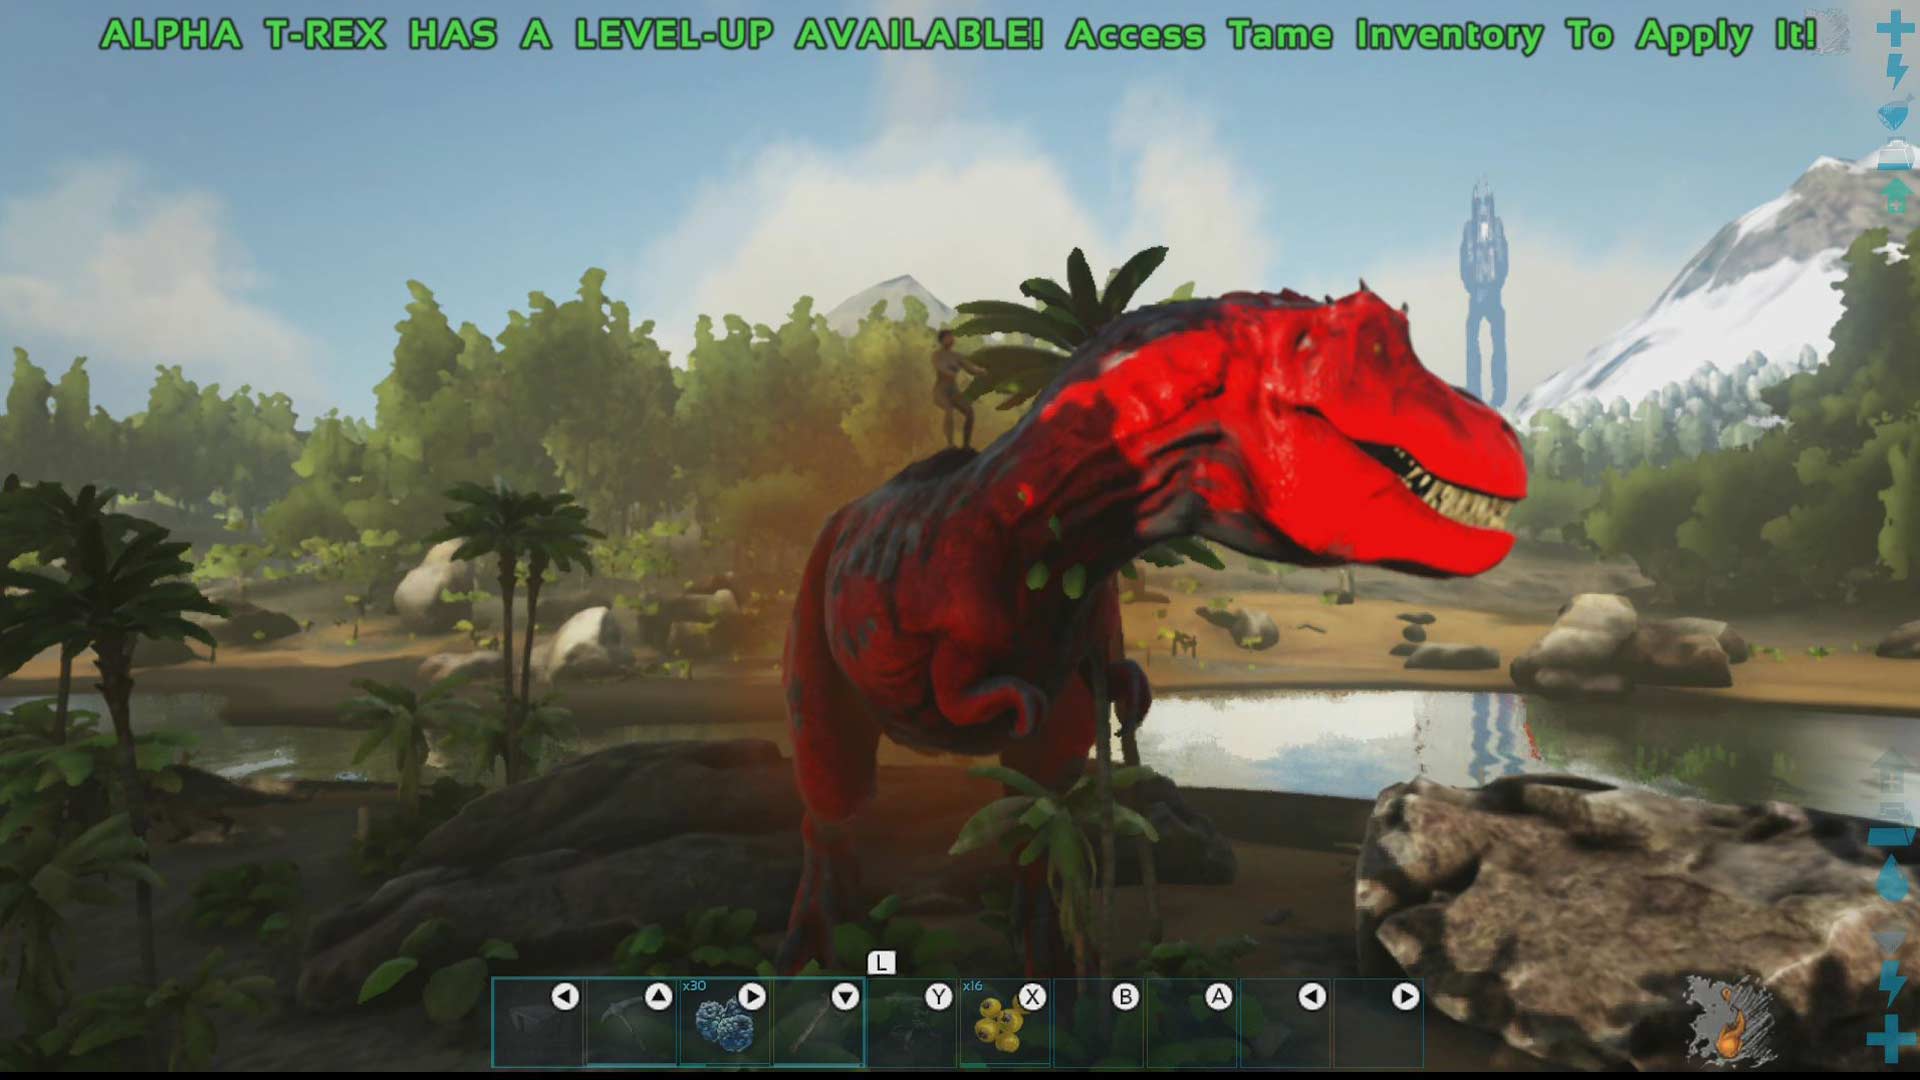 ark on the switch